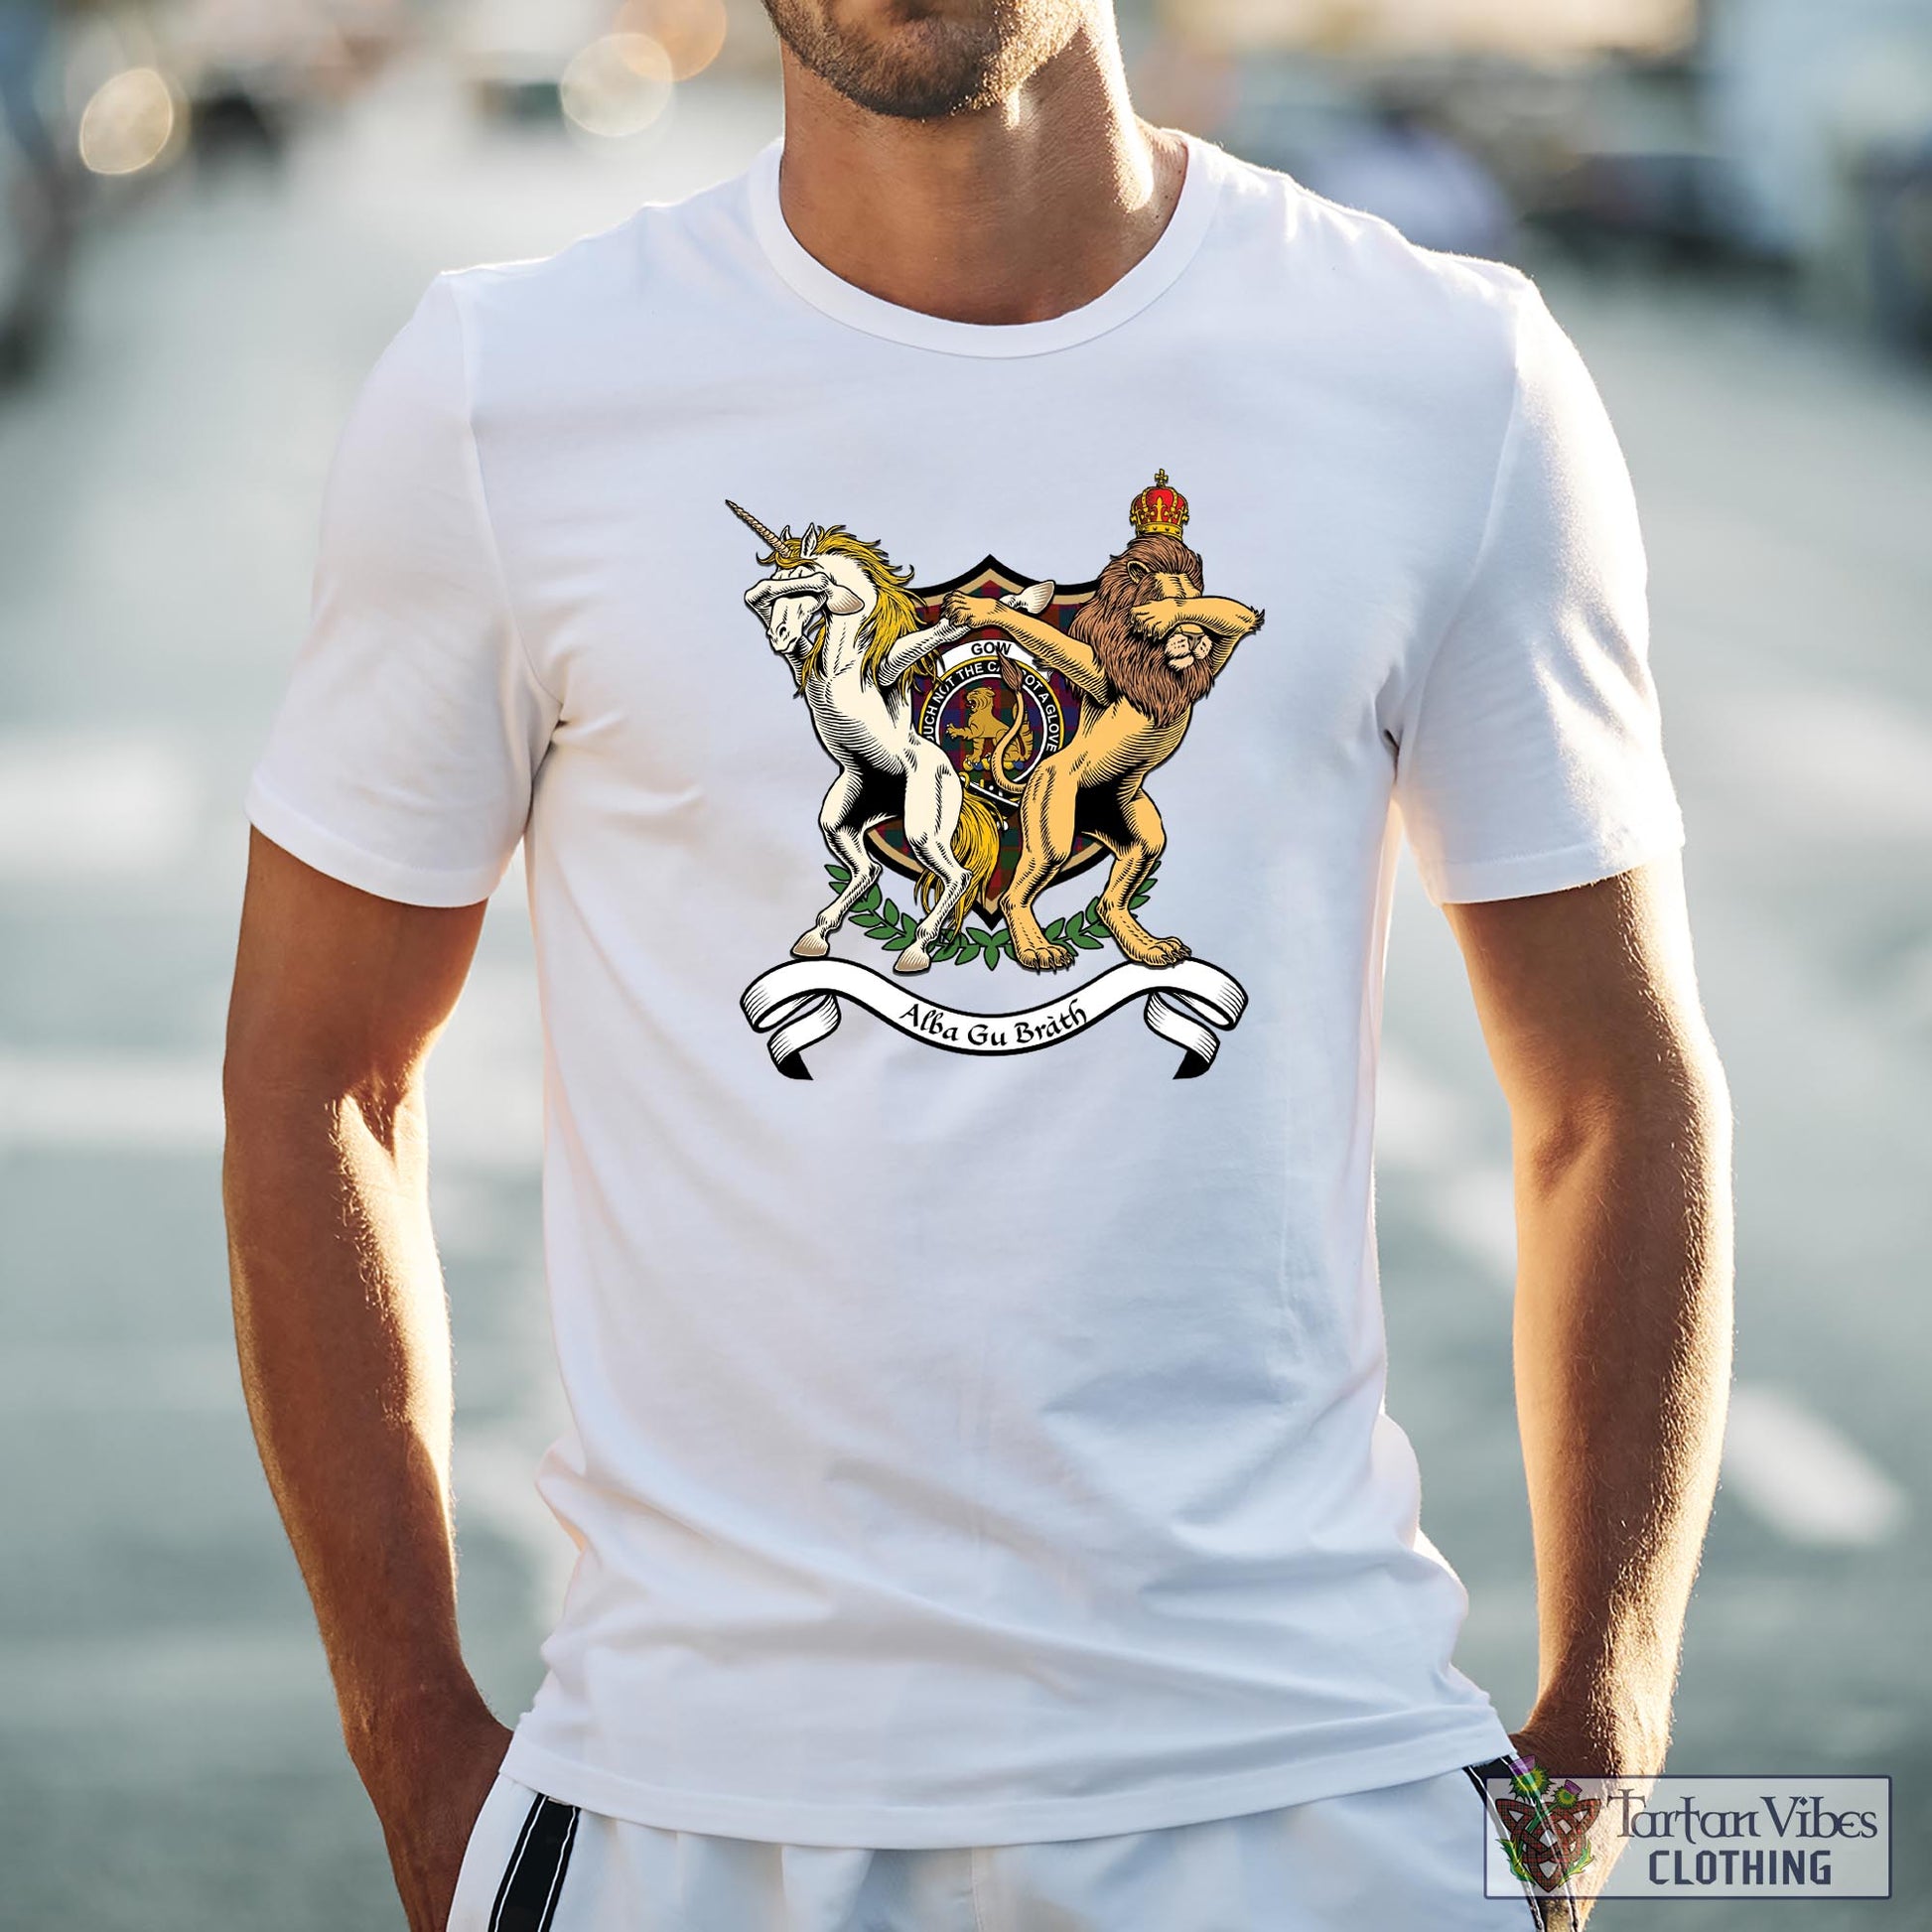 Tartan Vibes Clothing Gow Family Crest Cotton Men's T-Shirt with Scotland Royal Coat Of Arm Funny Style